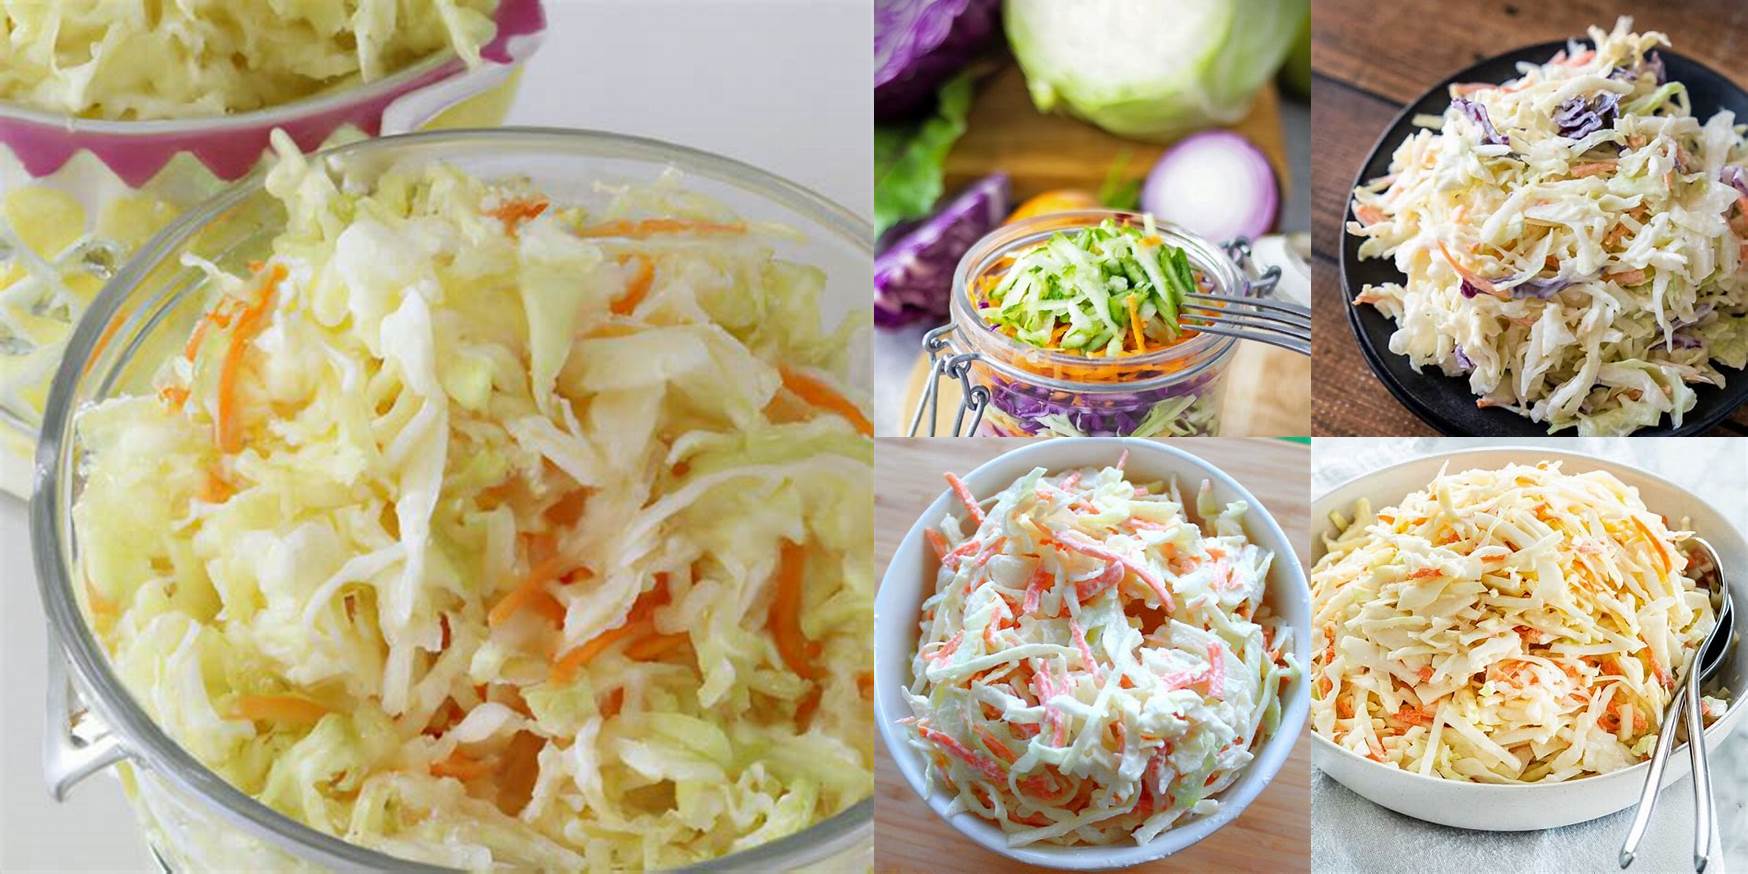 Can You Freeze Coleslaw Without The Dressing